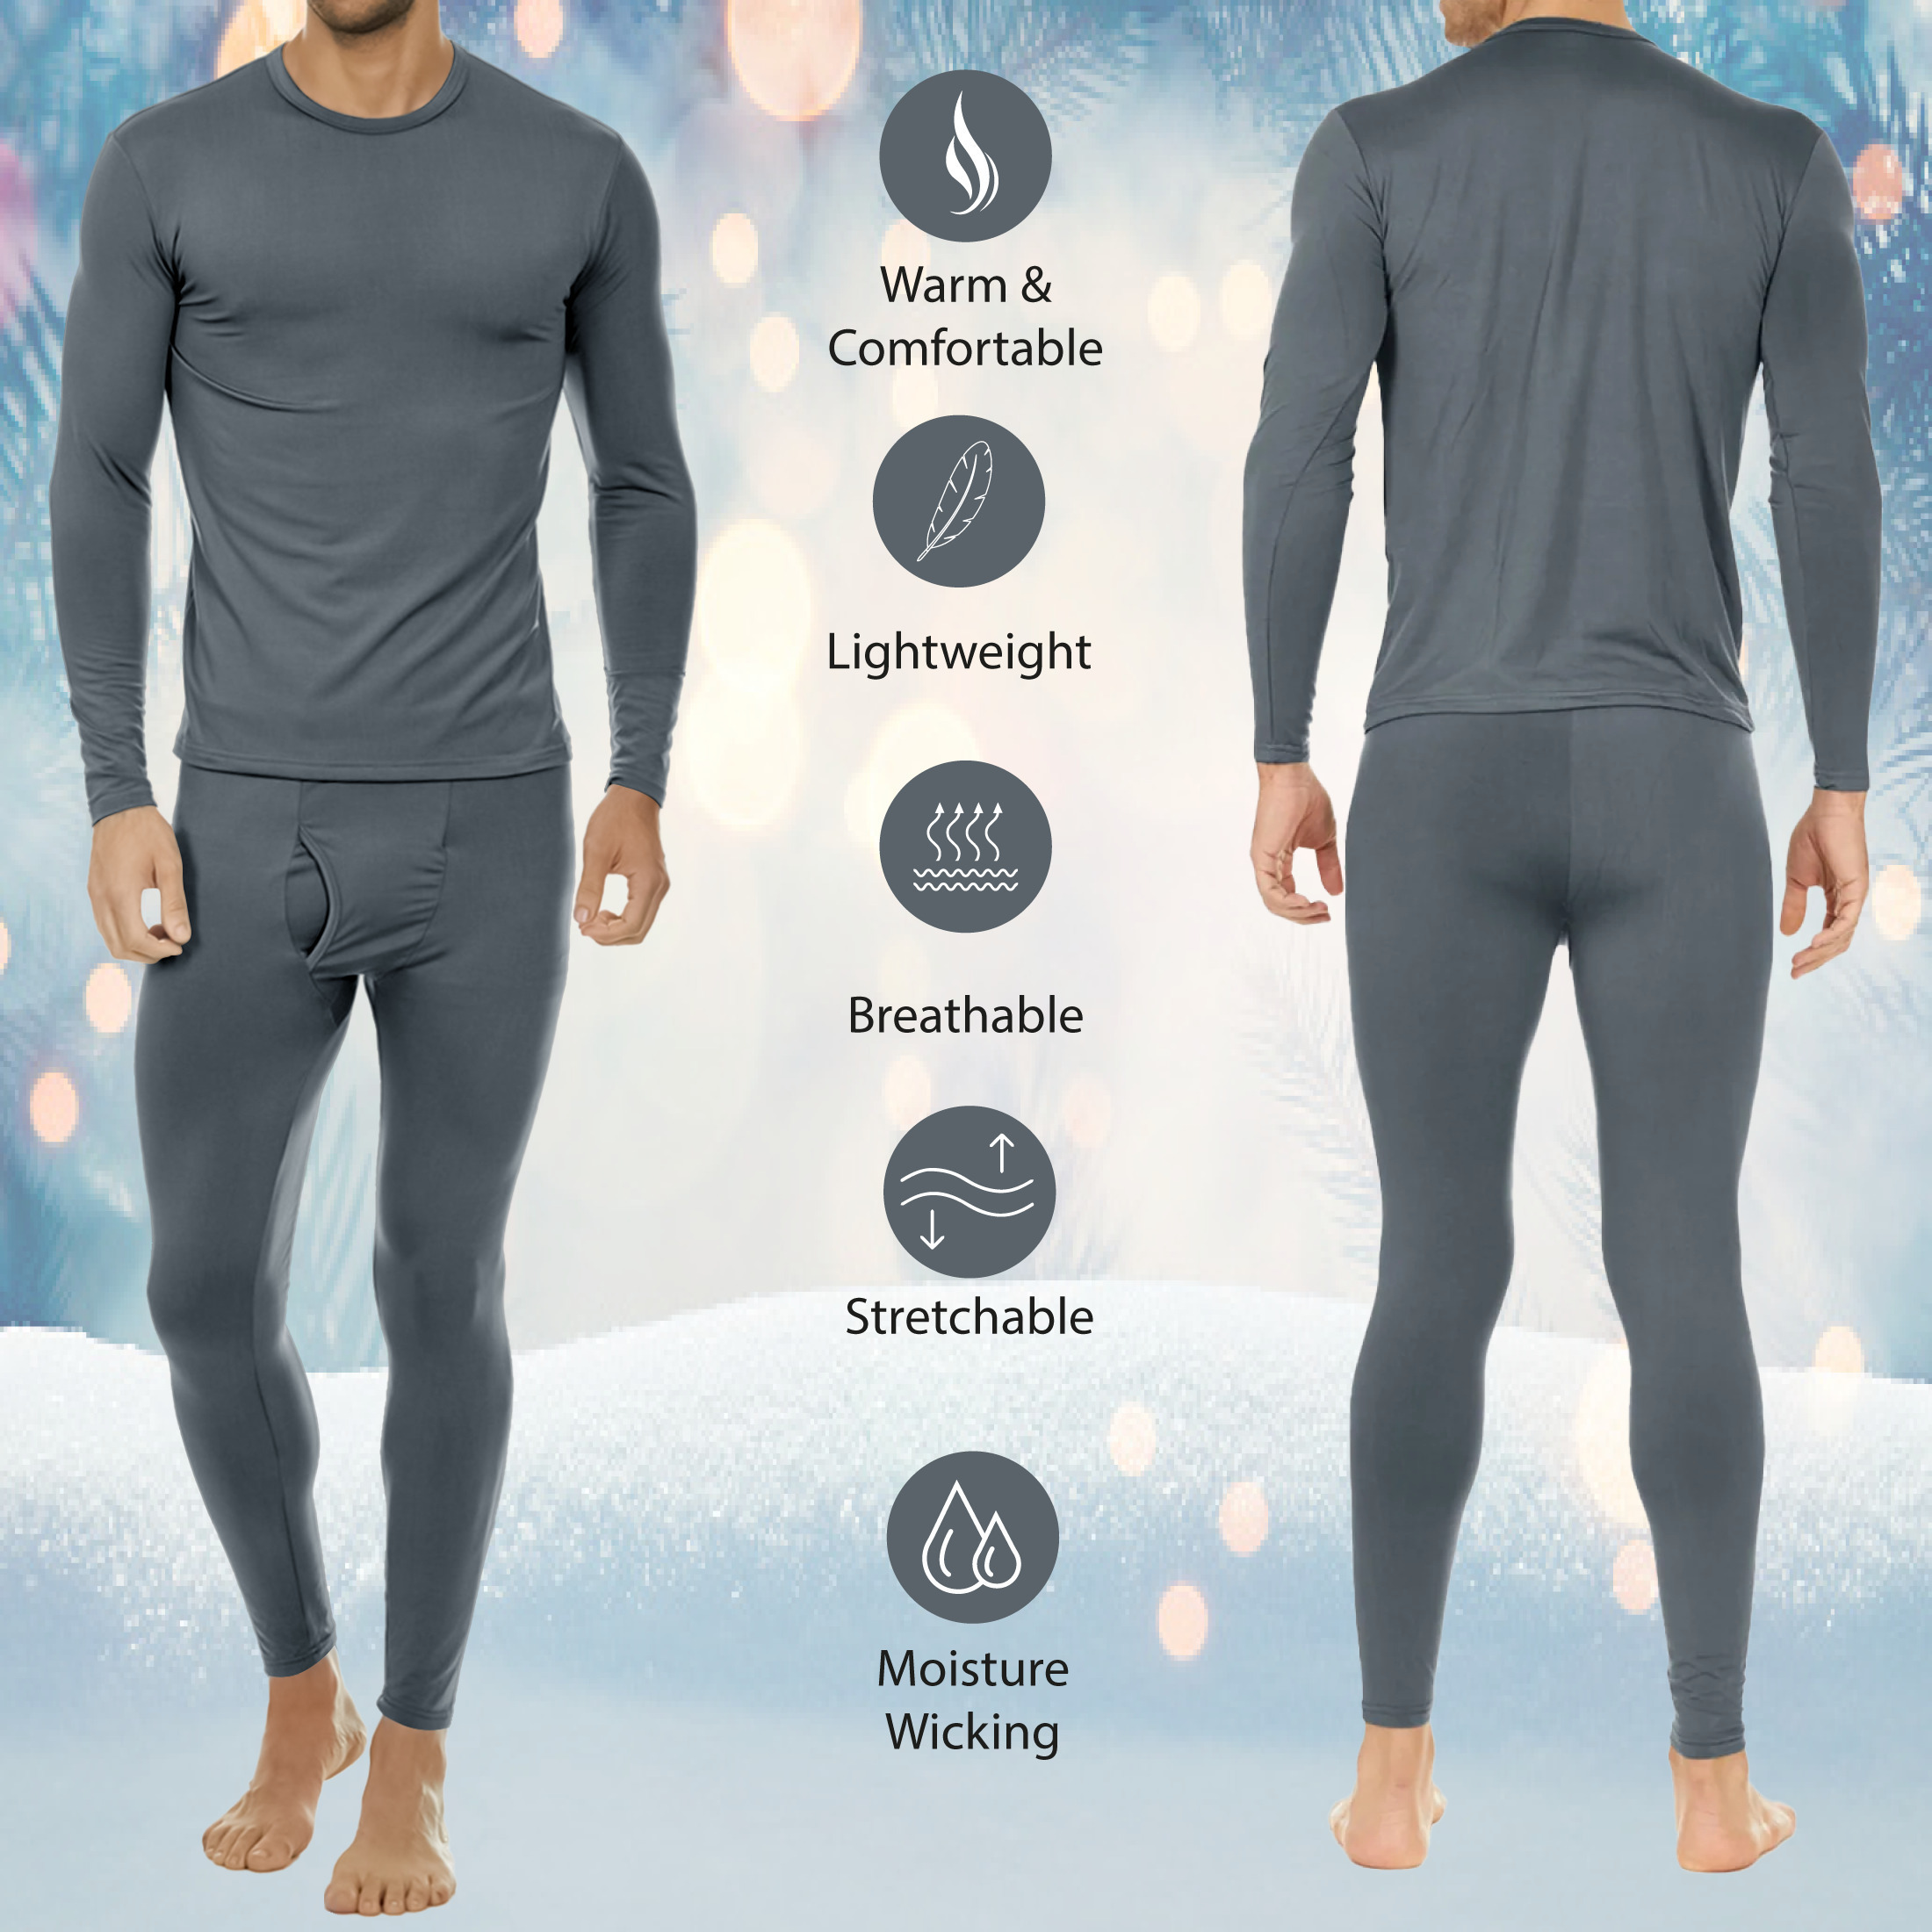 4-Piece: Men's Fleece Lined Thermal Set For Cold Weather - X-Large